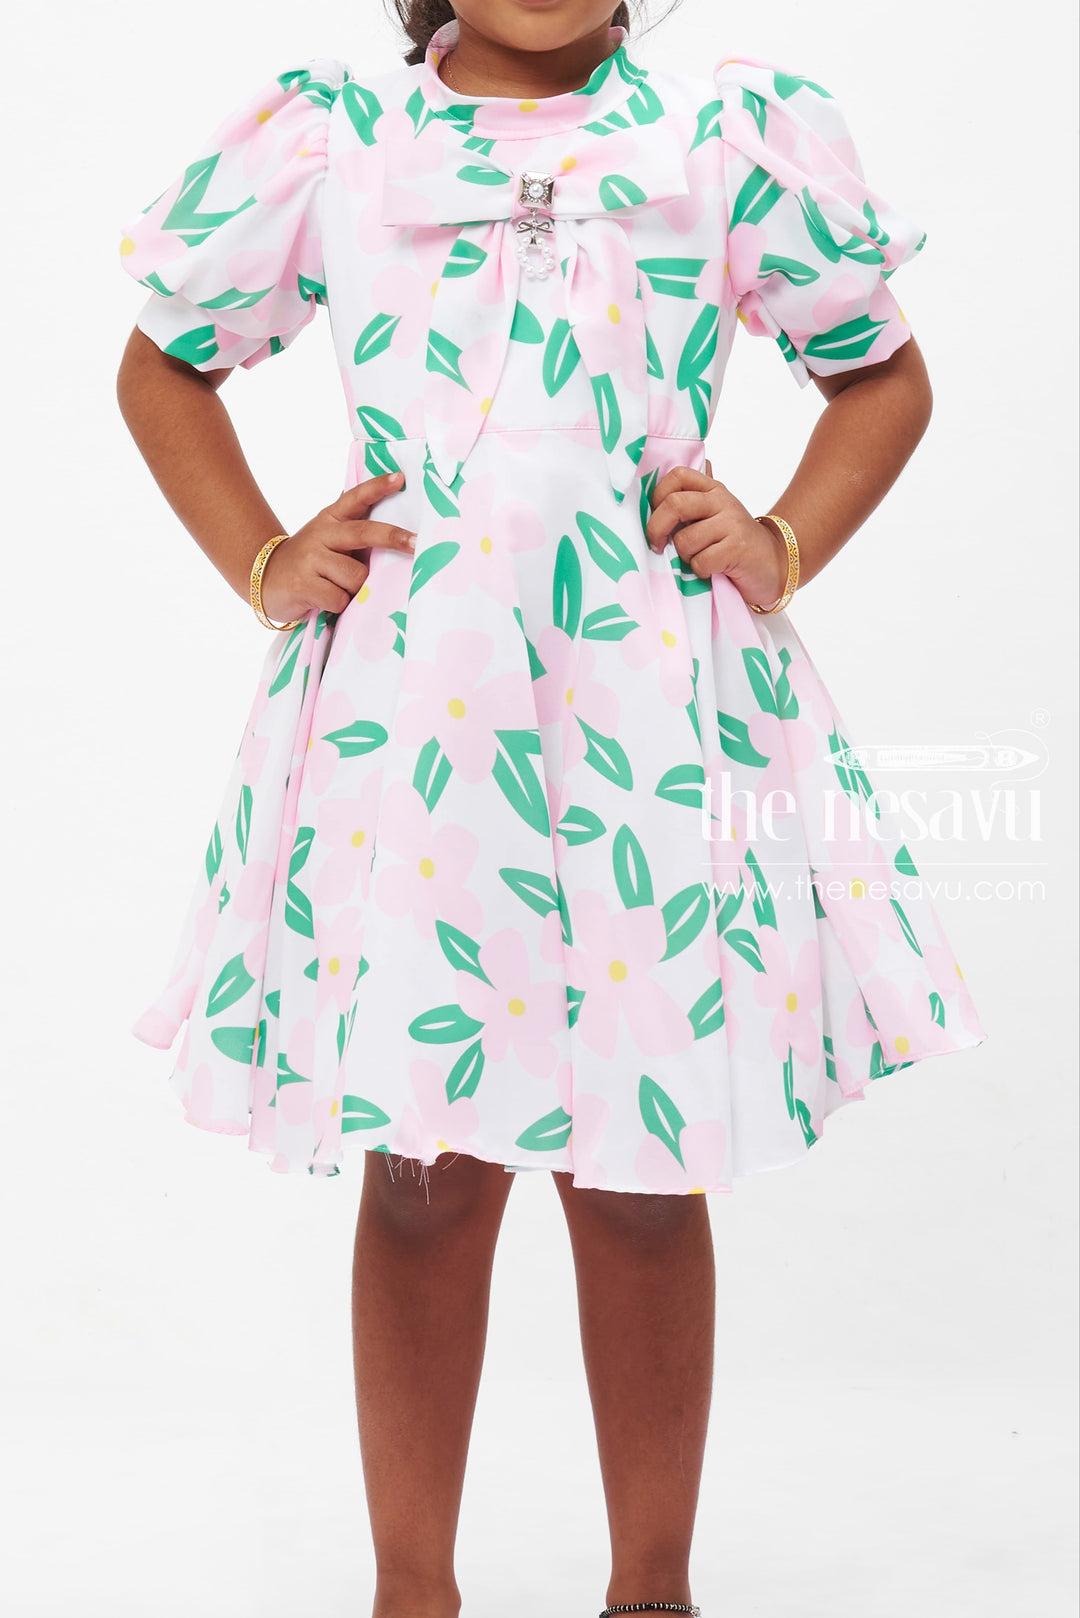 The Nesavu Girls Fancy Frock Pink Petal Perfection Frock with Floral Accents for Girls Nesavu Girls Floral Print Frock | Pink Petal Perfection with Jewel Accent | The Nesavu